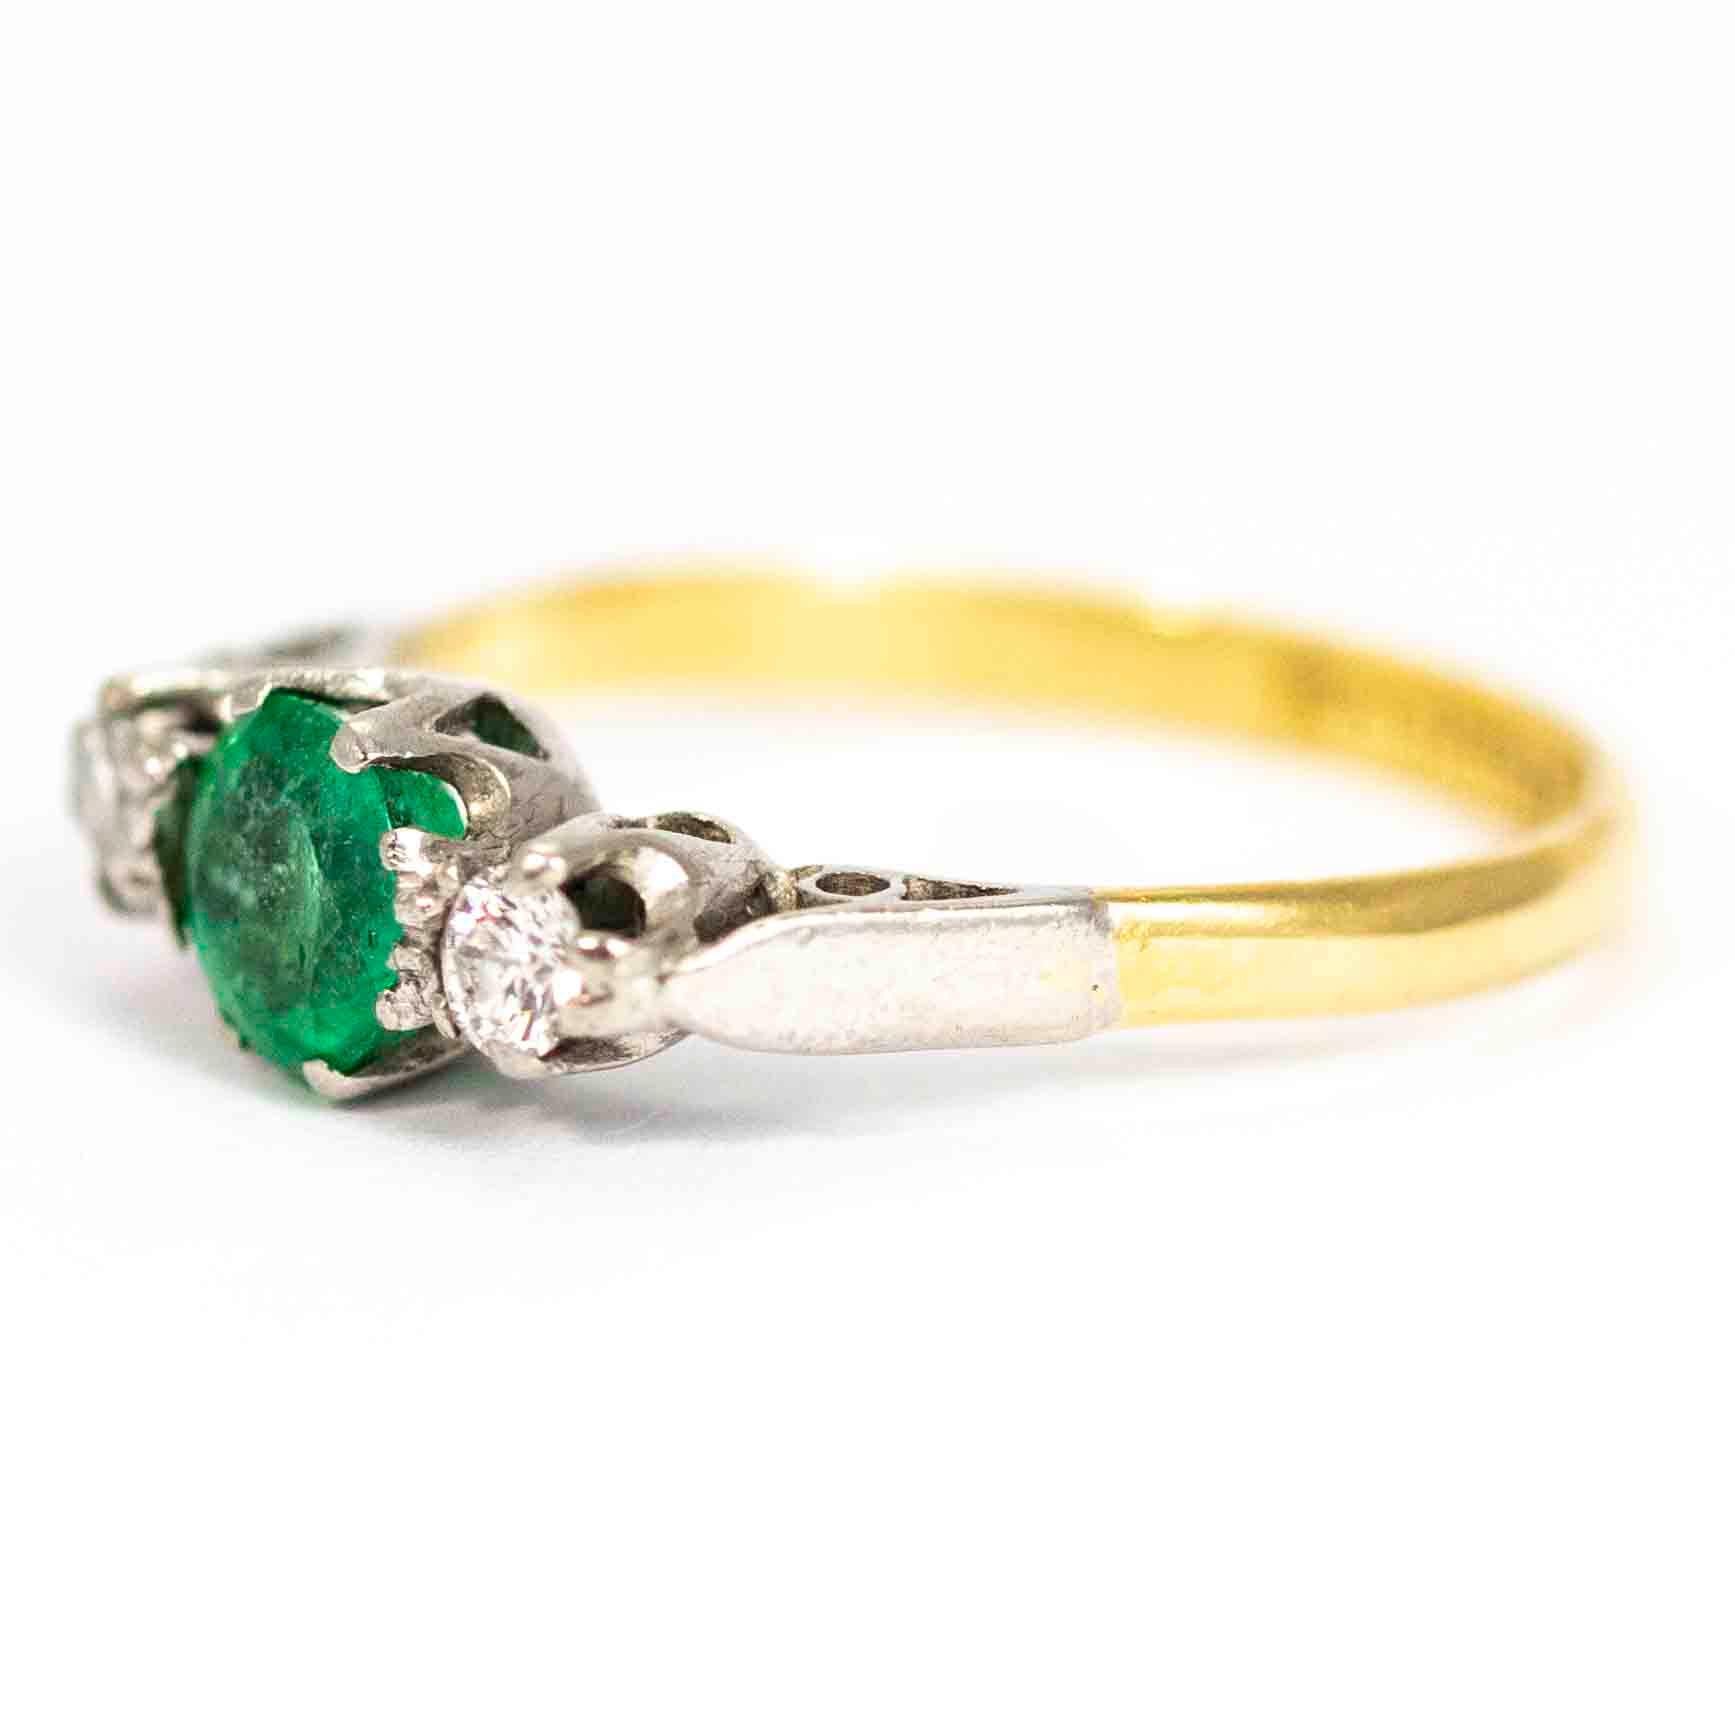 A wonderful vintage three-stone ring. Centrally set with a stunning round emerald measuring approximately 70 points, flanked either side by 10 point round cut diamonds. The stones and shoulders are set in platinum, the band is modelled in 18 carat